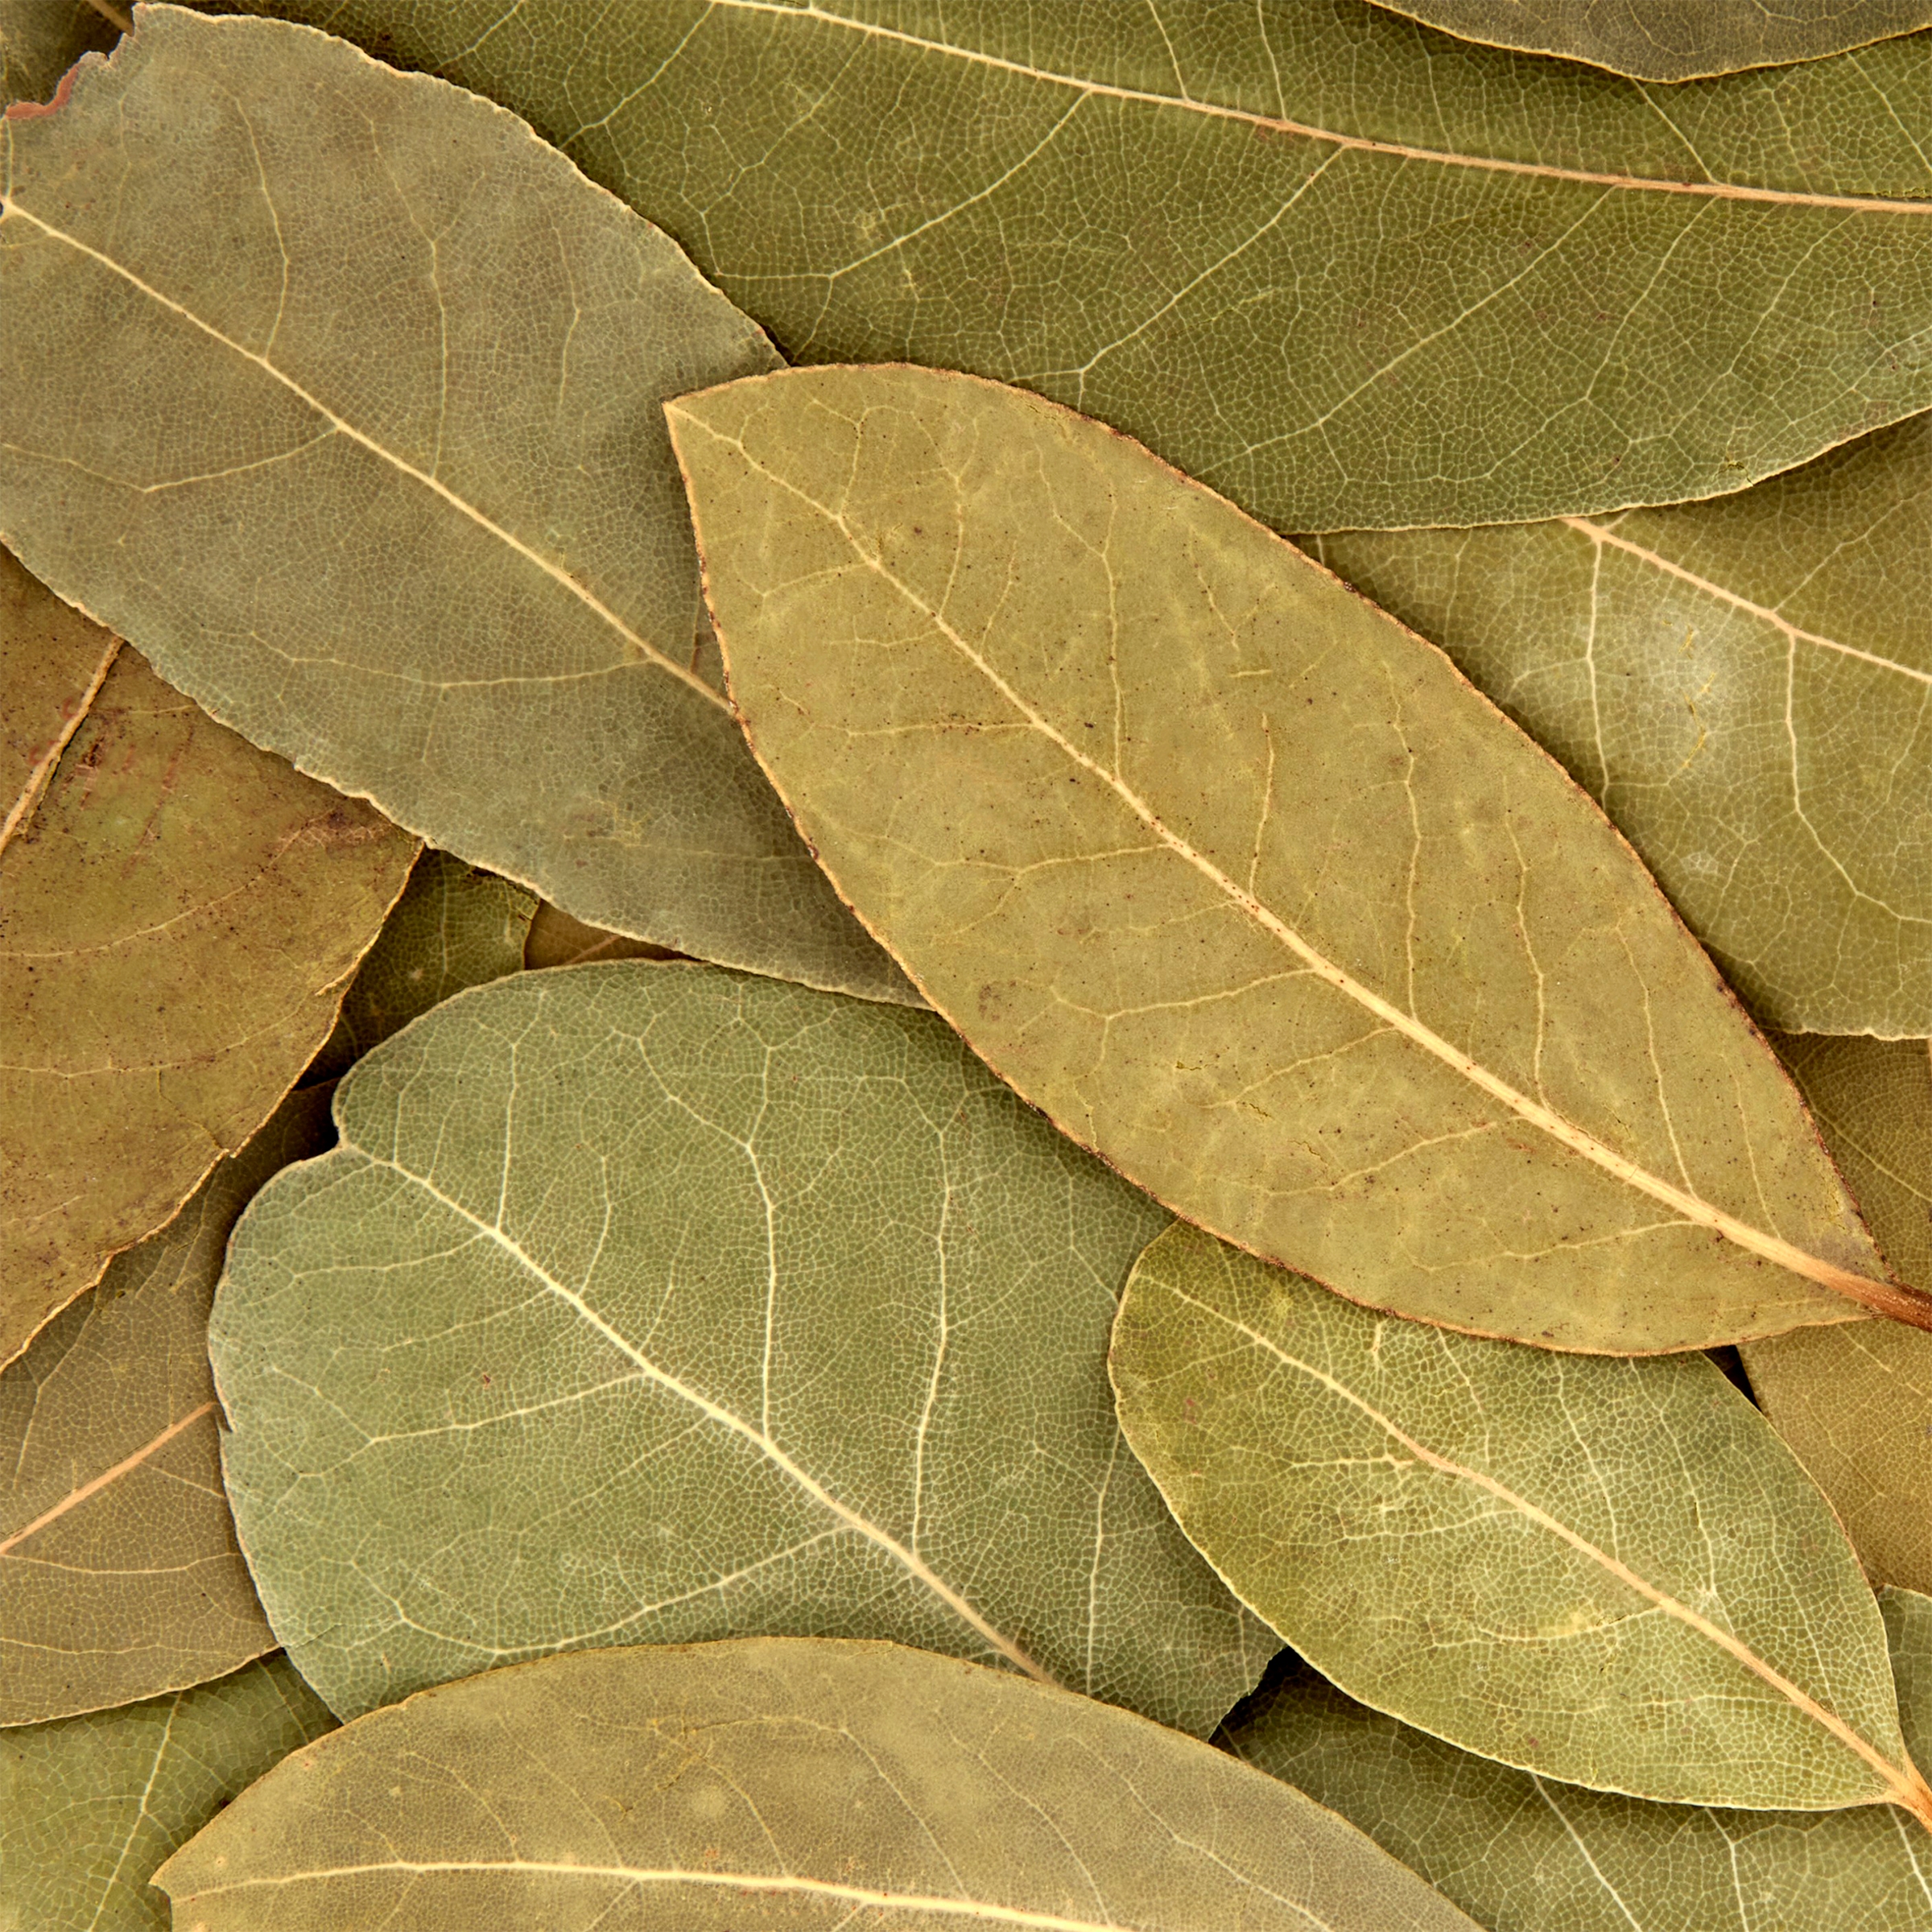 Great Value Bay Leaves, 0.12 oz - image 4 of 11